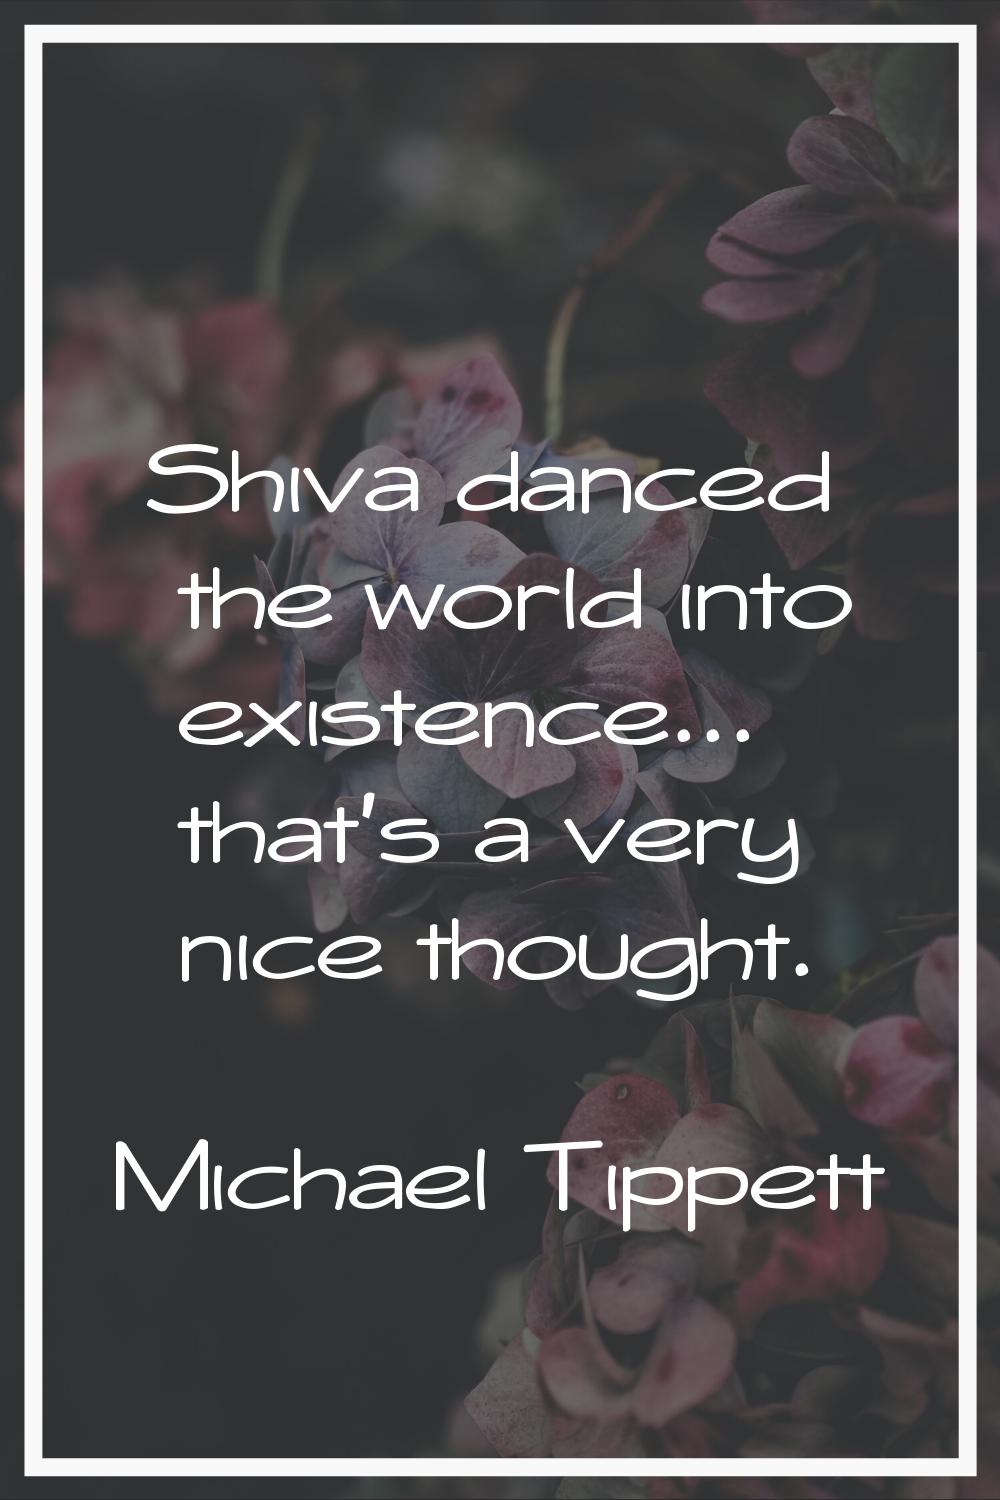 Shiva danced the world into existence... that's a very nice thought.